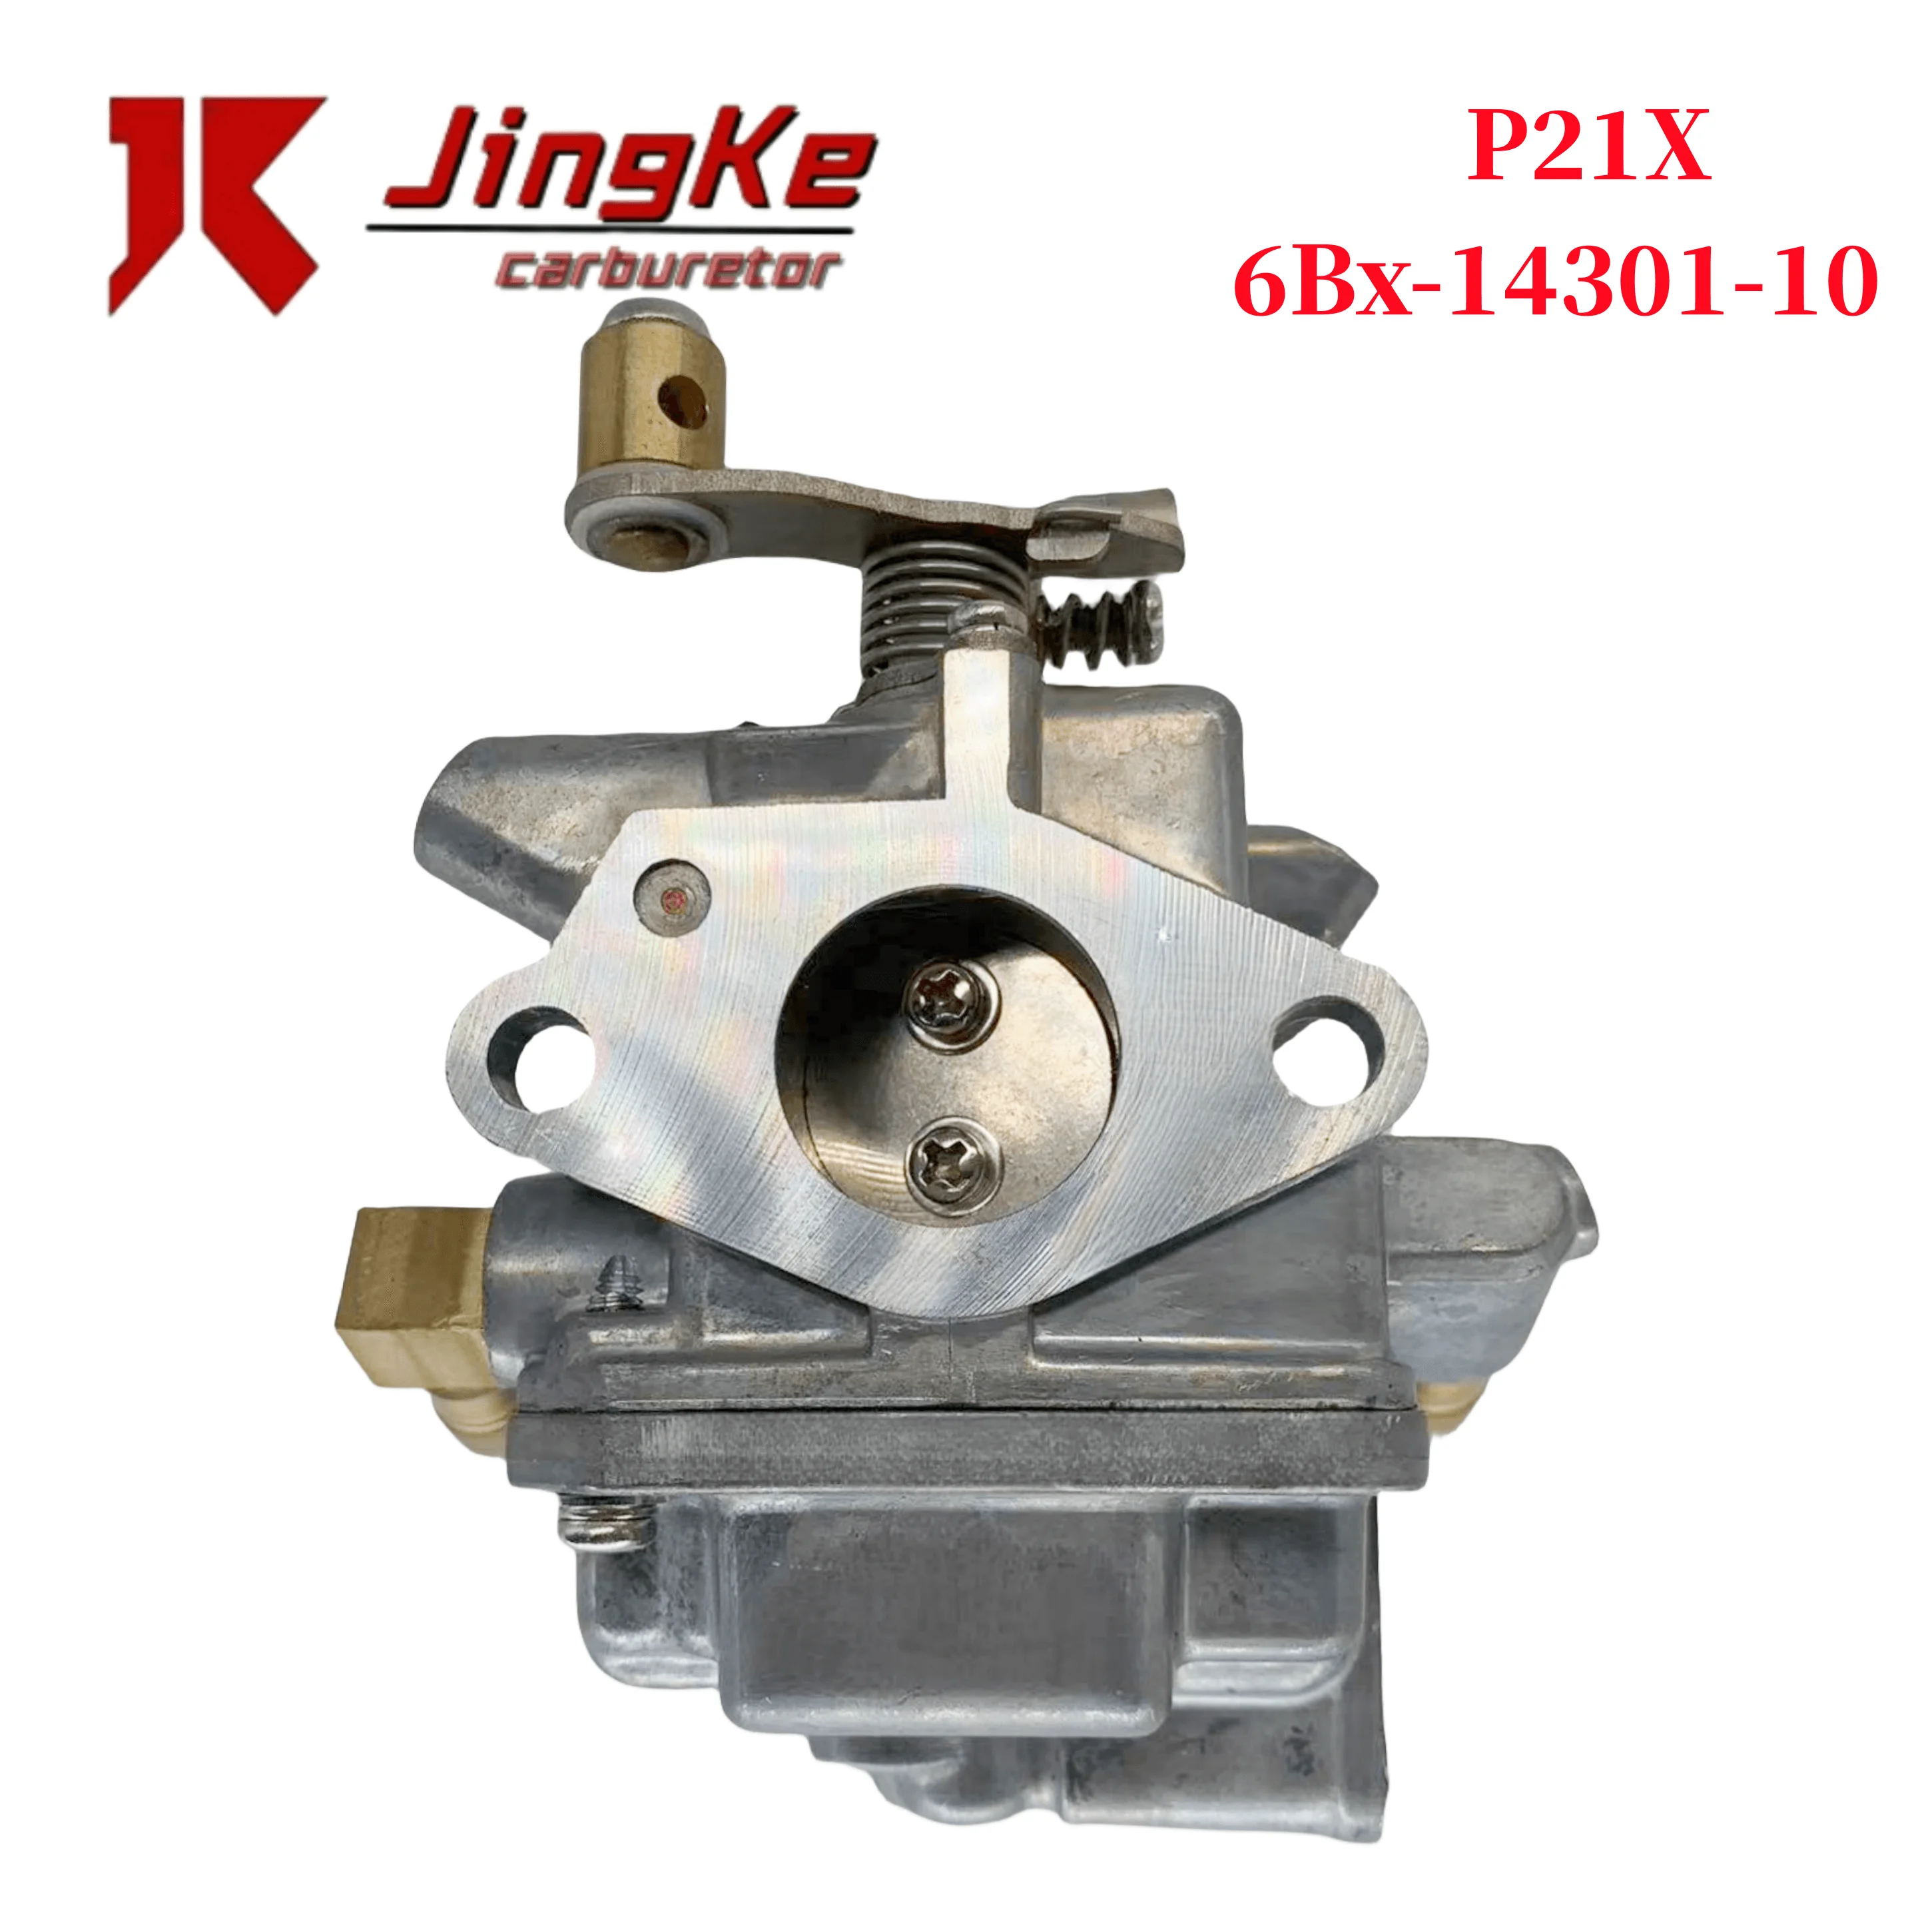 6BX-14300-10-00 Marine External Carburetor, P21X suitable for Yamaha 6HP Outboard Engine Carburetor Assembly 6BX-14310-10 main switch panel single engine key panel assembly on off start 704 control box yamaha outboard 704 82570 12 00 704 82570 08 00